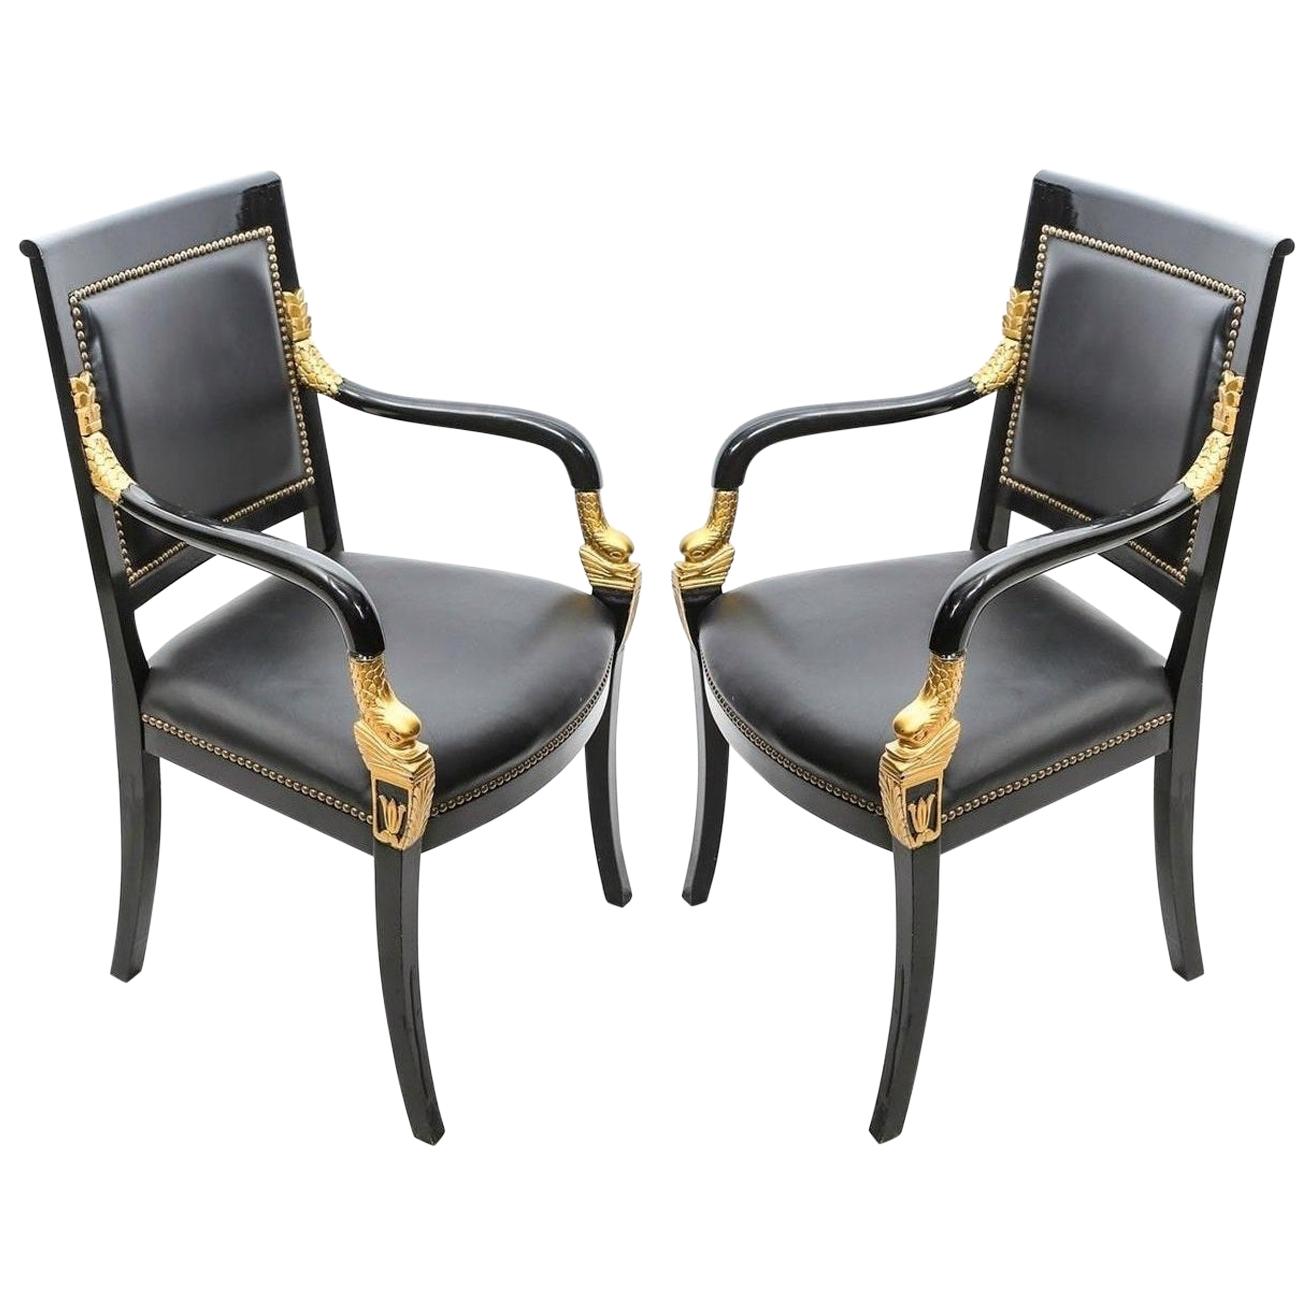 Pair of 19th Century French Empire Lacquered Fauteuils